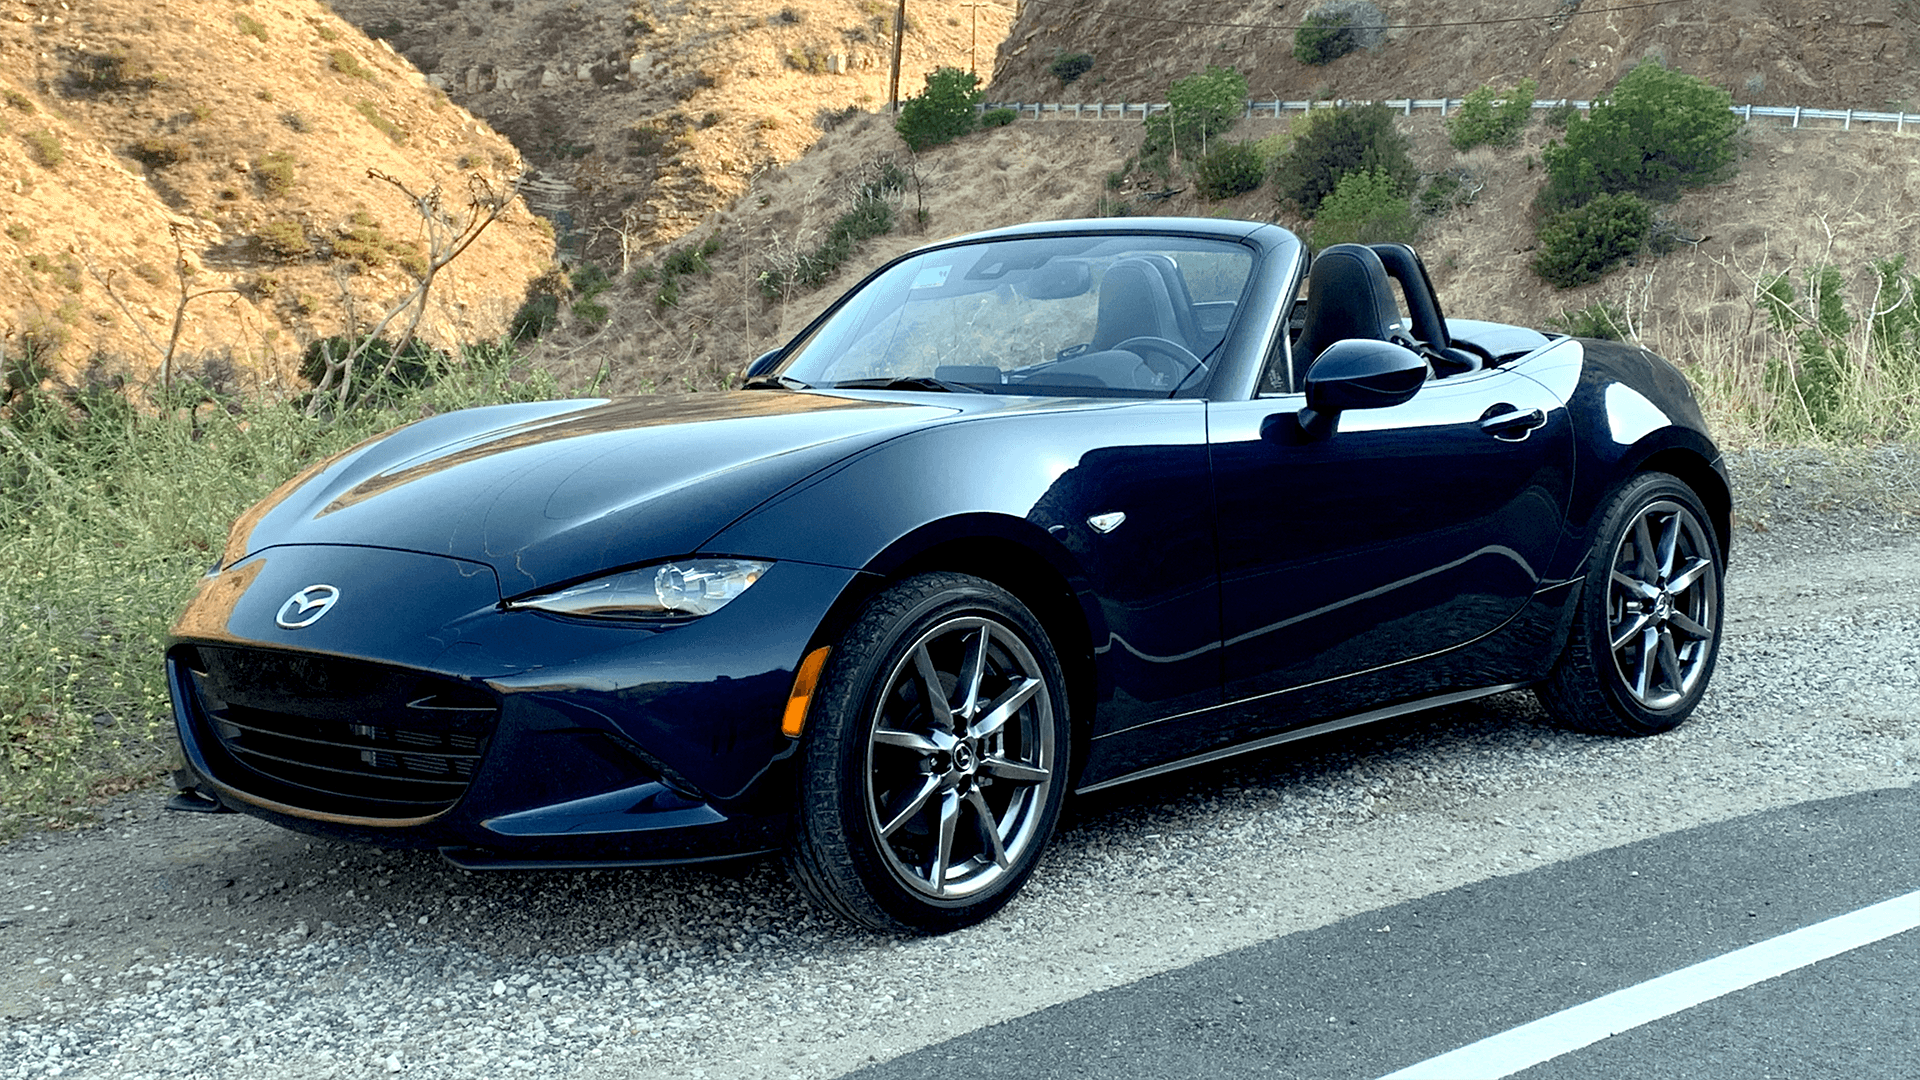 2021 Mazda MX-5 Miata Review: Still a Pure Driver’s Car After 32 Years